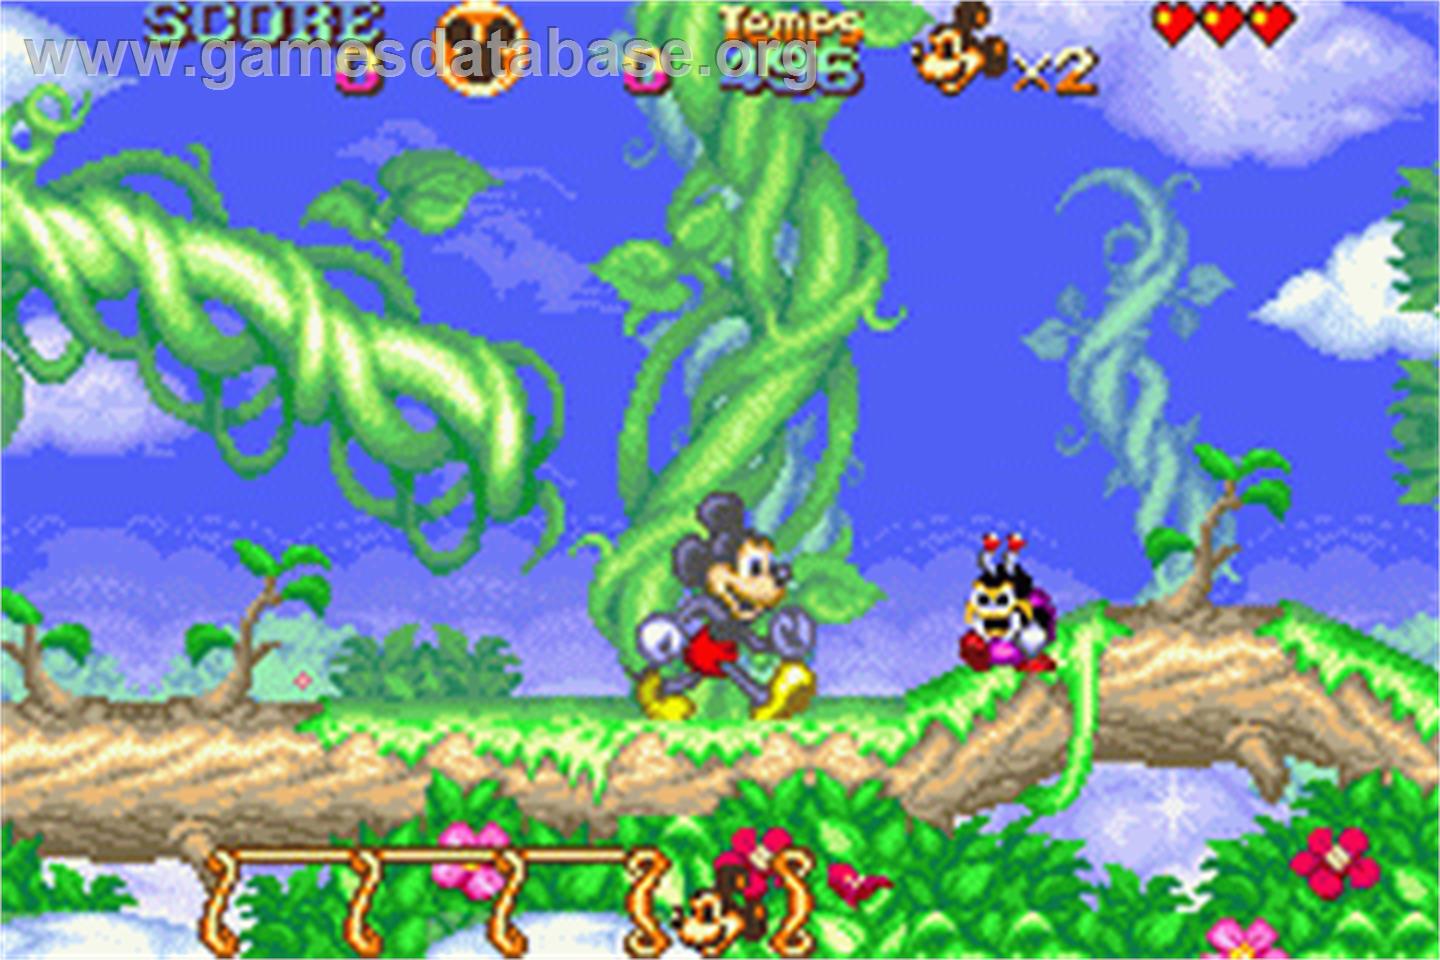 Magical Quest Starring Mickey & Minnie - Nintendo Game Boy Advance - Artwork - In Game